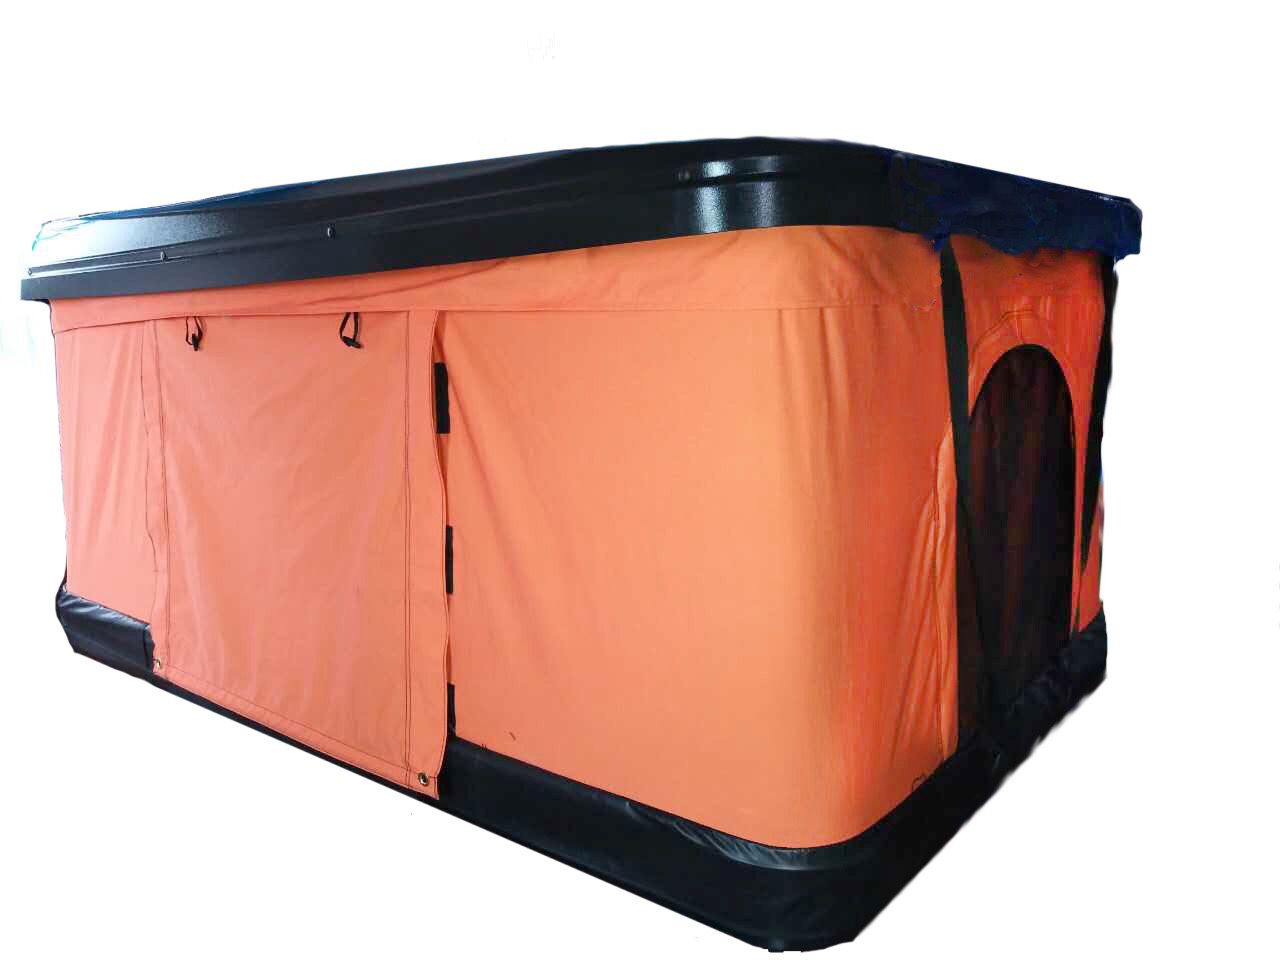 ORANGE Pop Up Roof Tent Universal for Cars Trucks SUVs Camping Travel Mobile